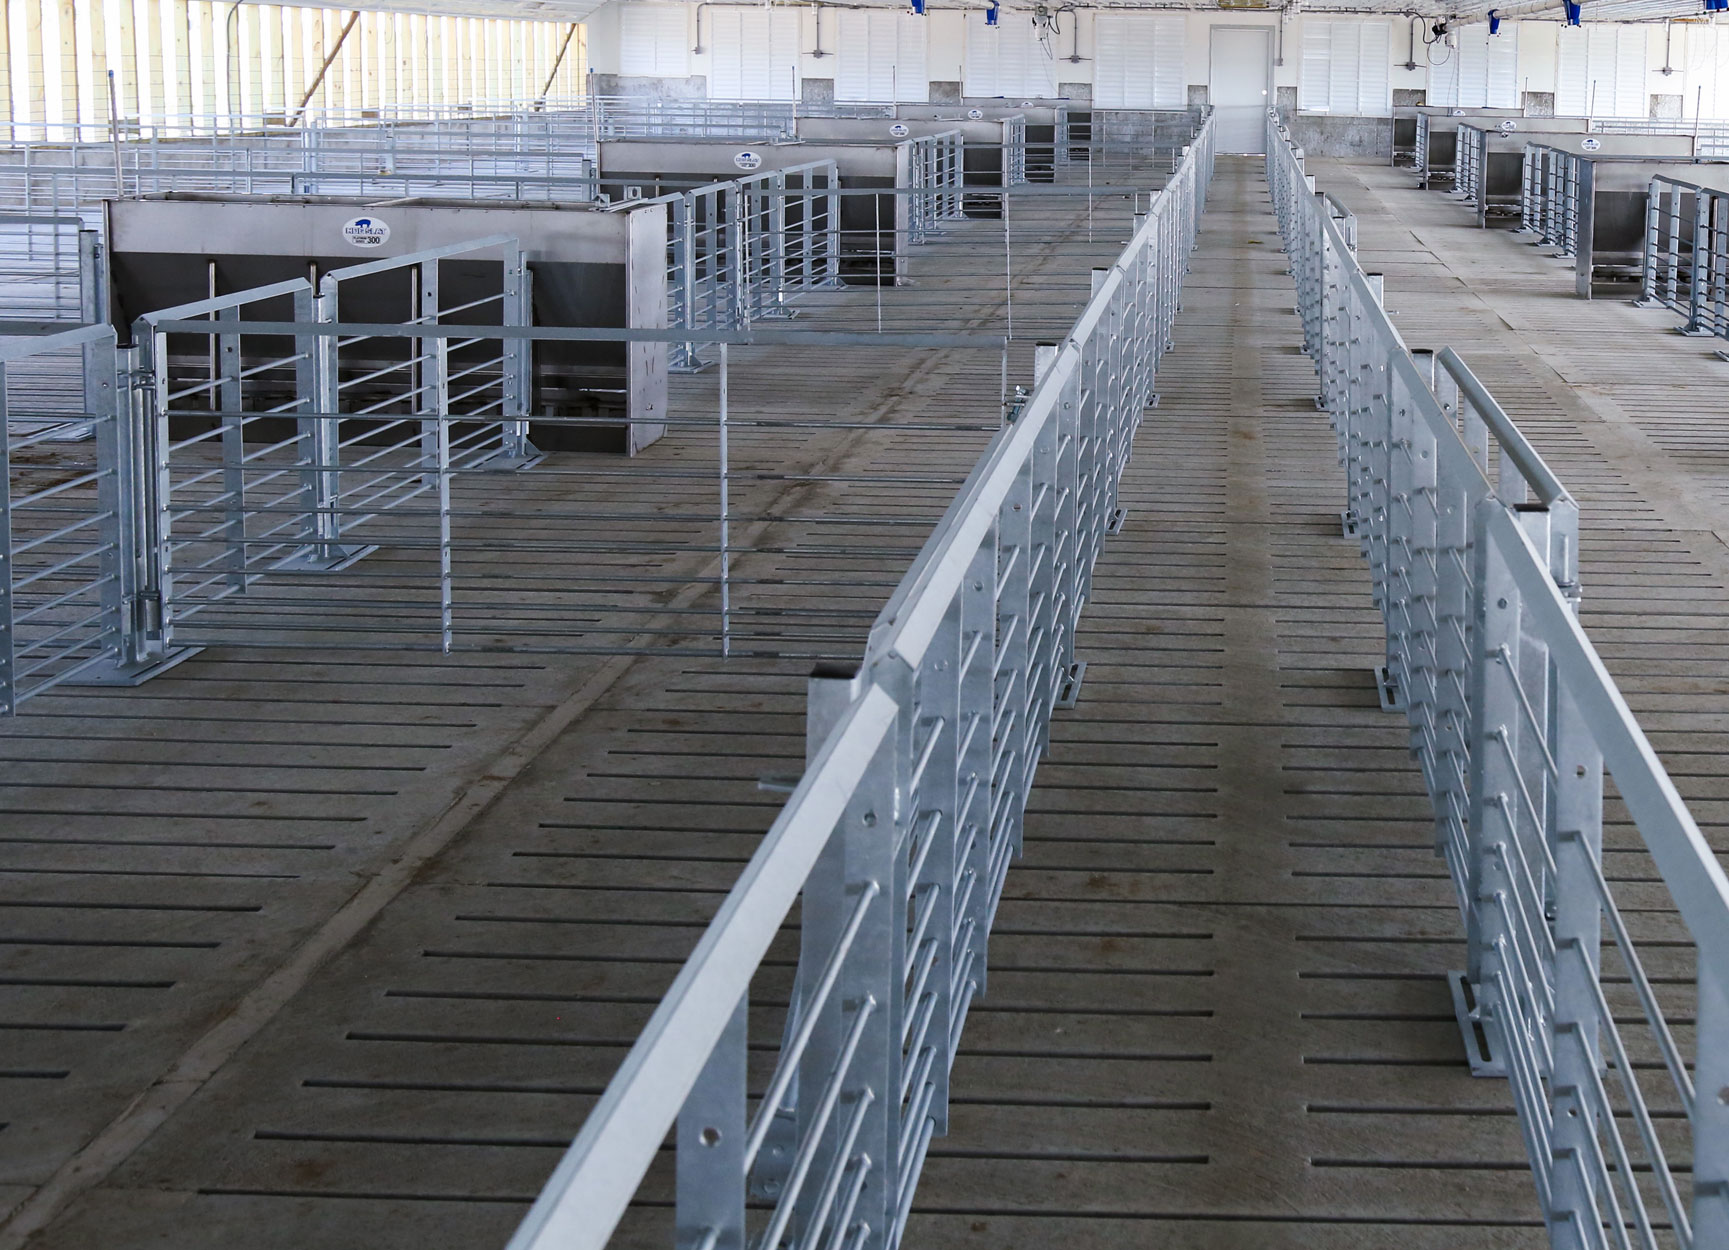 Hog Slat gating is available in options to meet all common integrator penning layouts and can be built to fit specific barn layouts as needed.